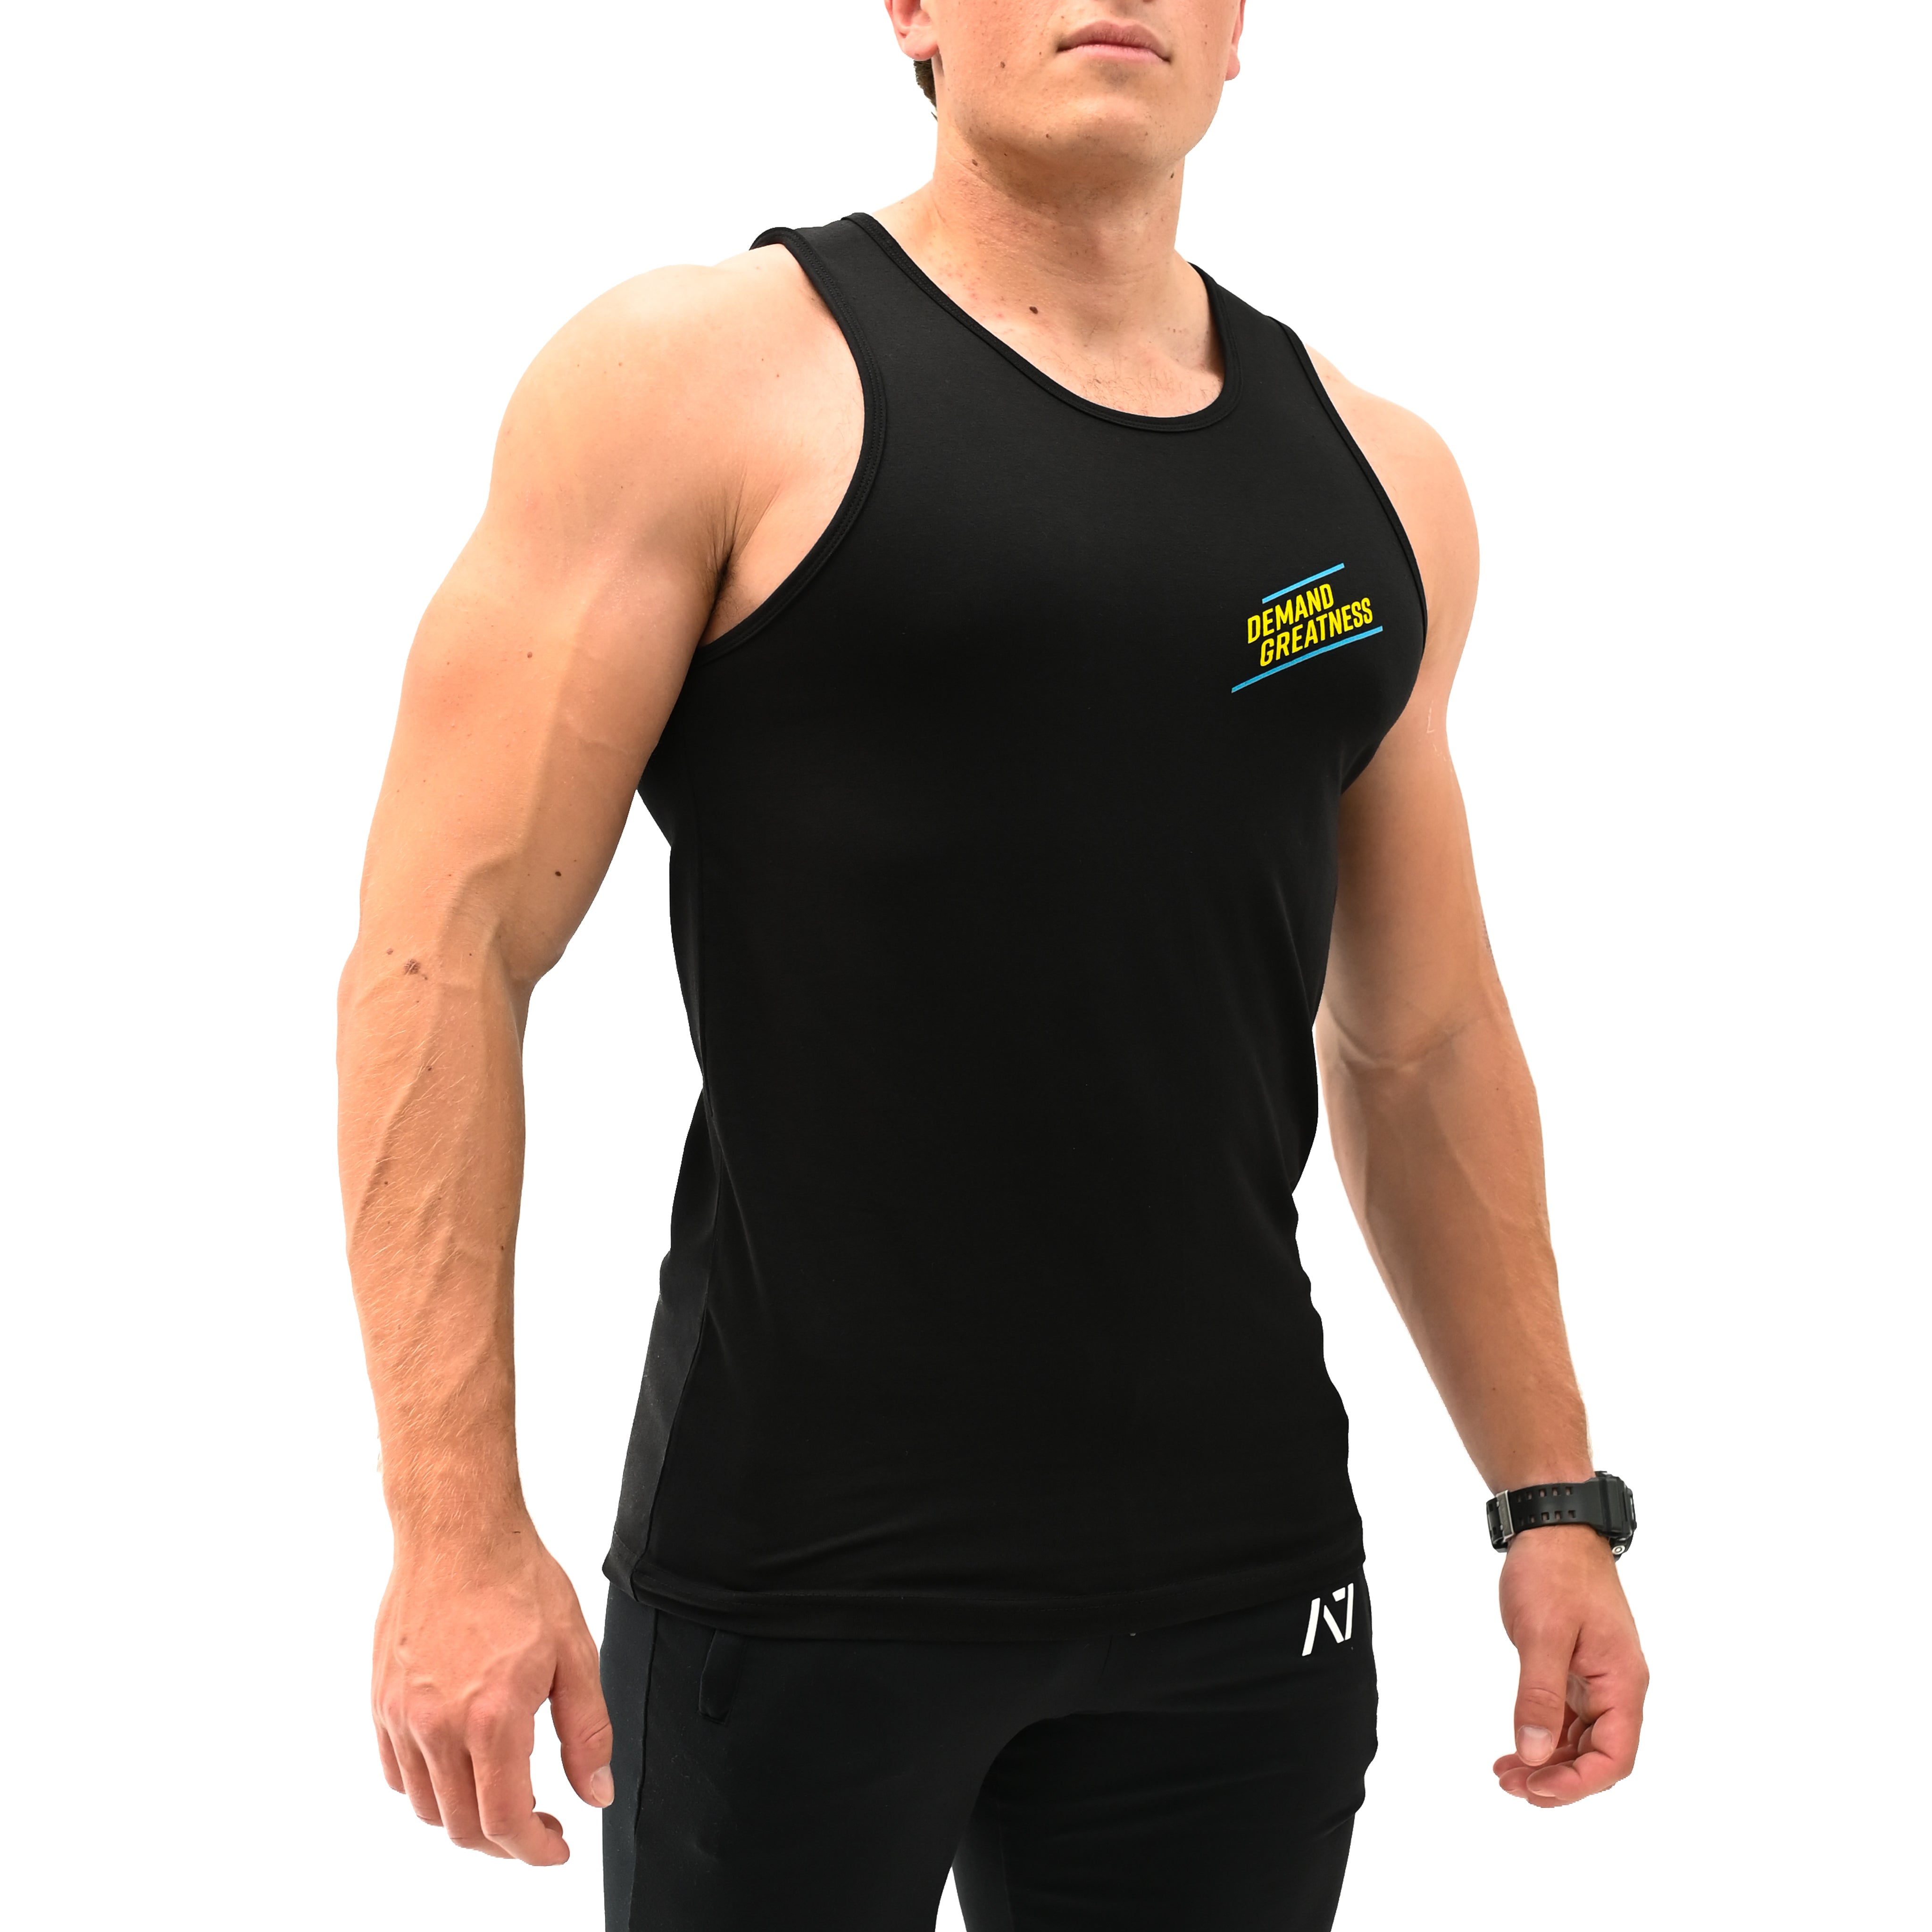 Geo Weave Non Bar Grip Tank T-Shirt is perfect for in and out of the gym. Purchase Geo Weave Non Bar Grip tshirt UK from A7 UK. Purchase Geo Weave Shirt Europe from A7 UK. Best gymwear shipping to UK and Europe from A7 UK. Geo Weave is our newest Non Bar Grip Design. The best Powerlifting apparel for all your workouts. Available in UK and Europe including France, Italy, Germany, Sweden and Poland.